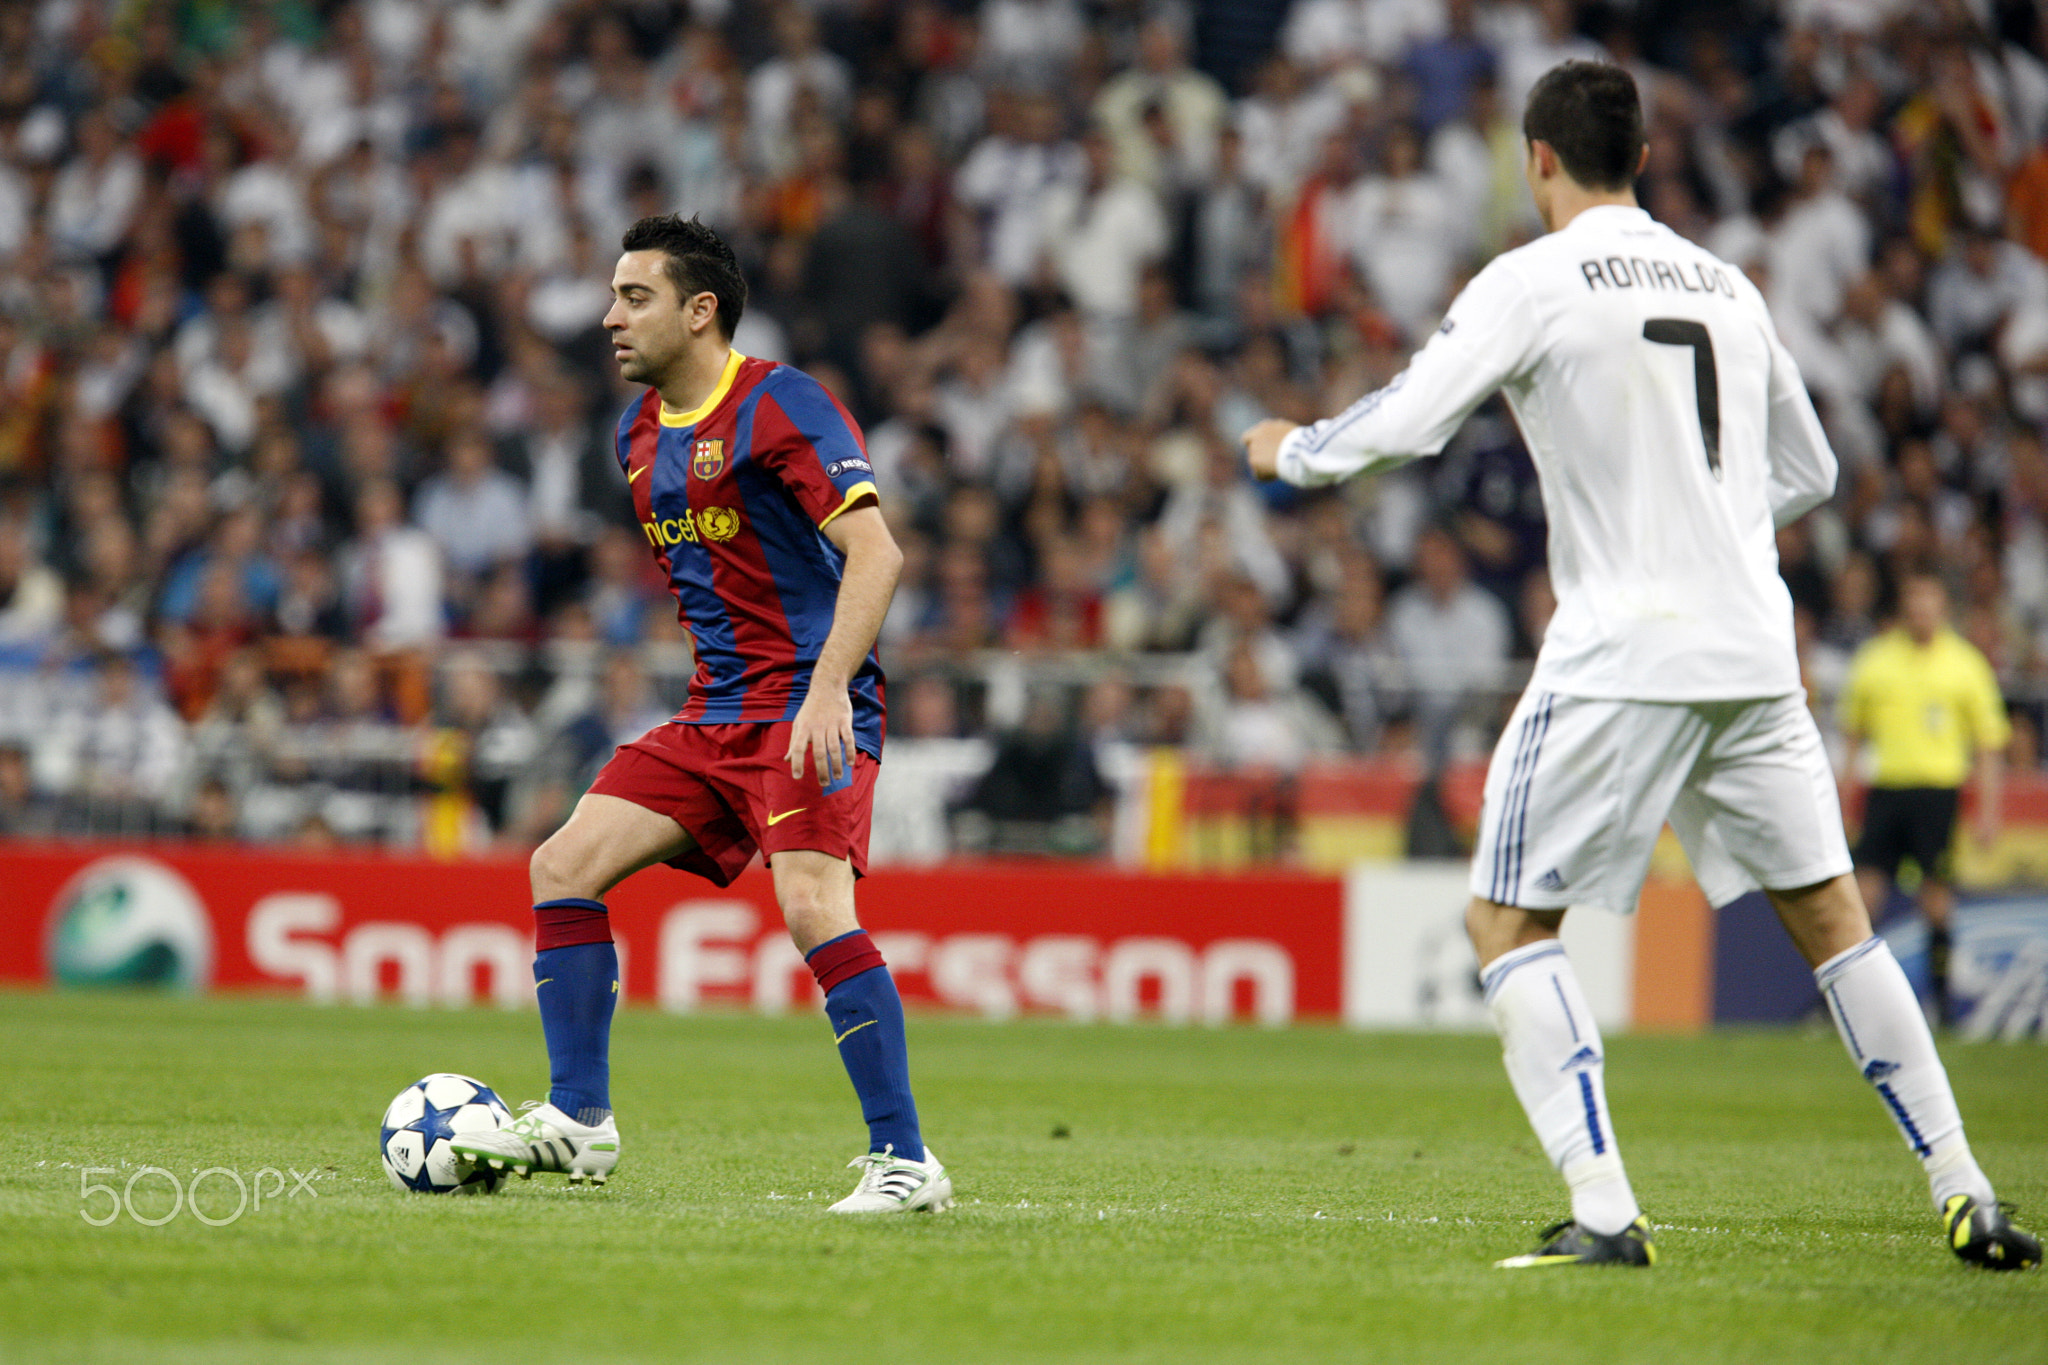 Xavi watched by Cristiano Ronaldo, UEFA Champions League Semifinals game between Real Madrid and FC